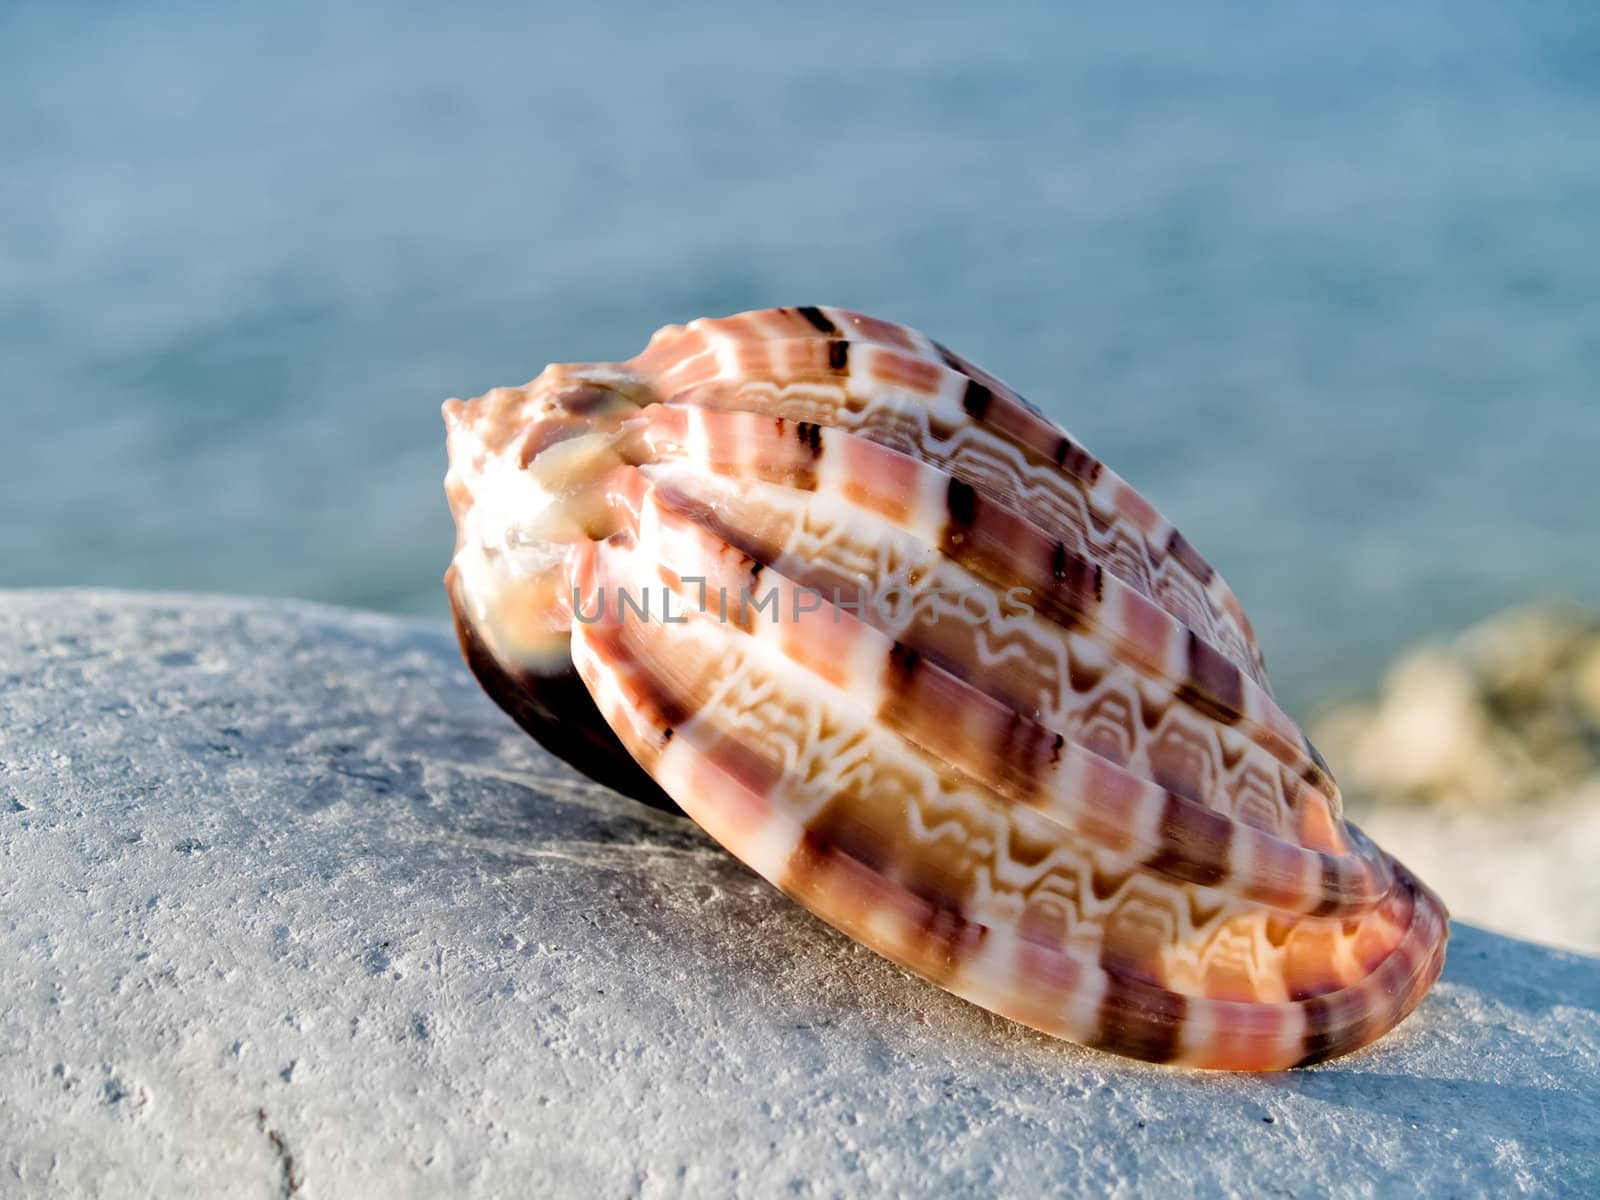 Beautiful seashell from the Mediterranean on a stone